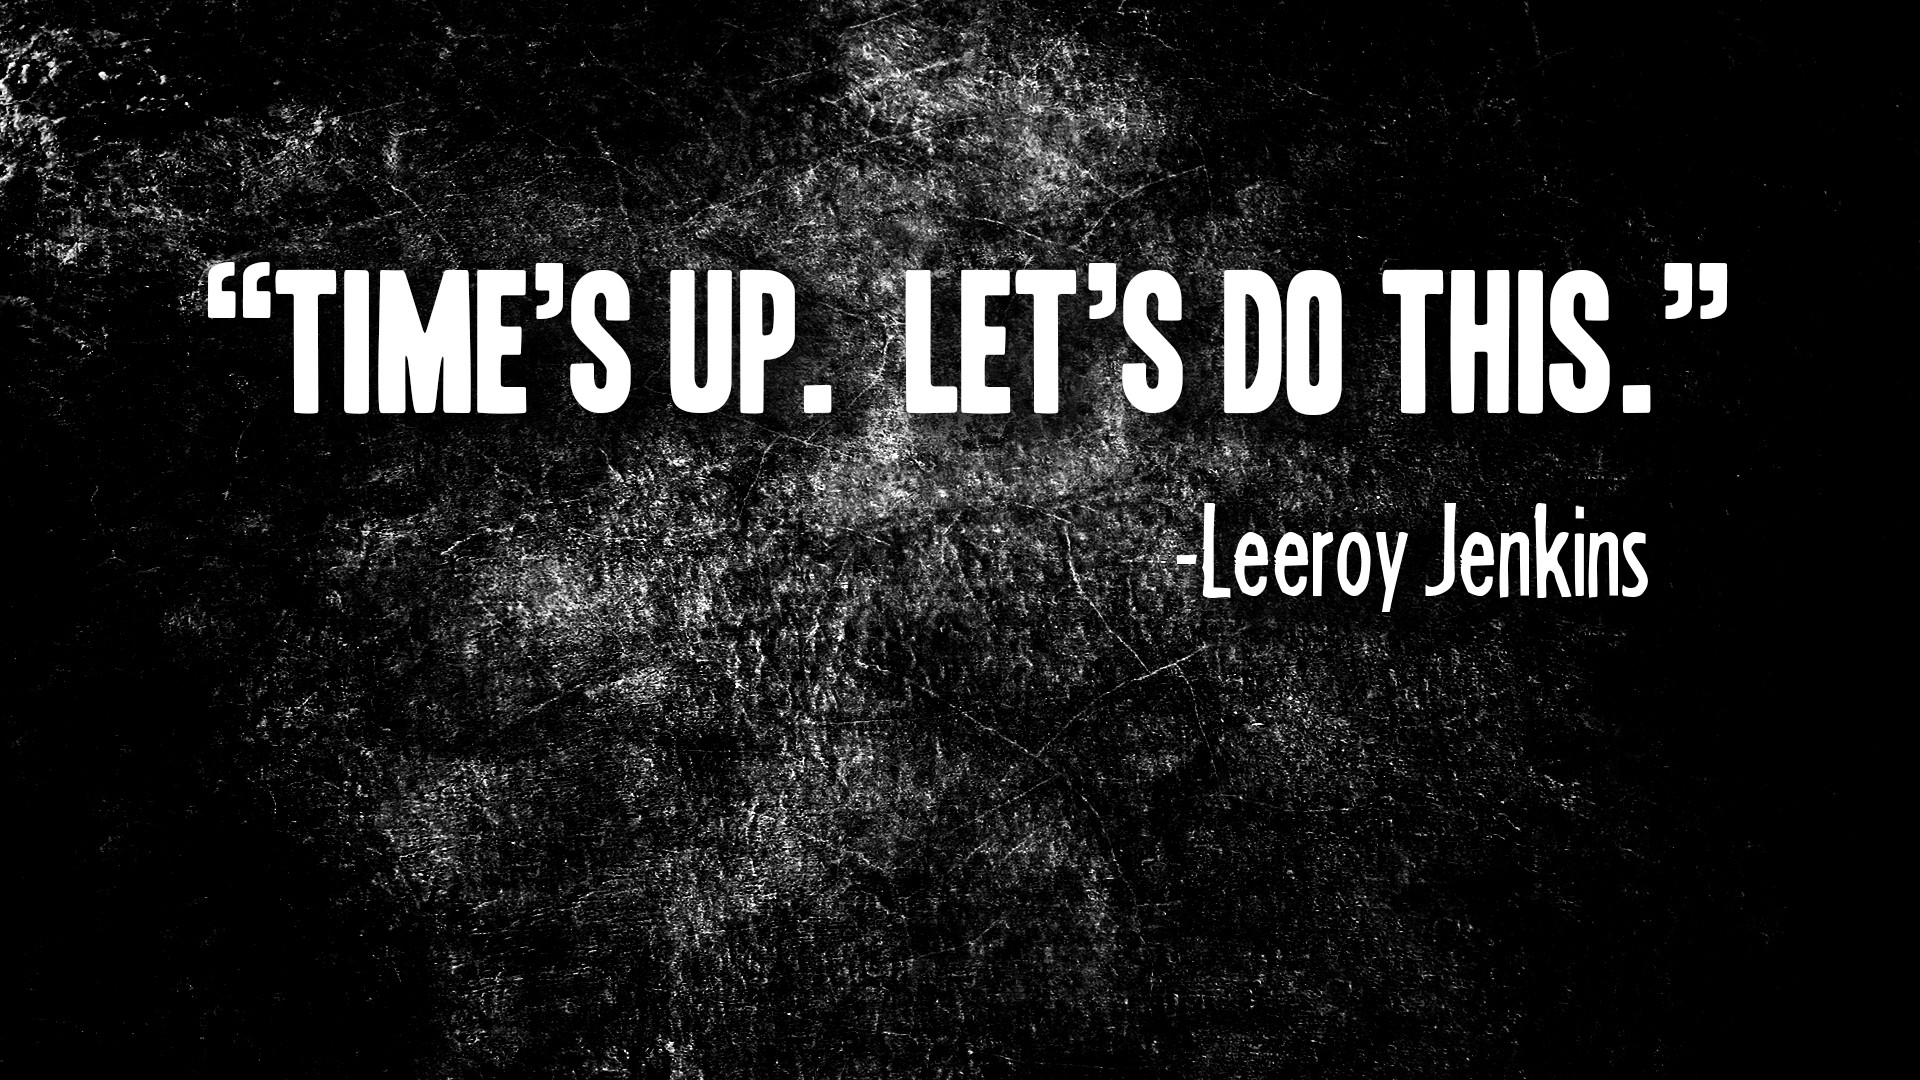 times up let's do - "Time'S Up. Let'S Do This." Leeroy Jenkins